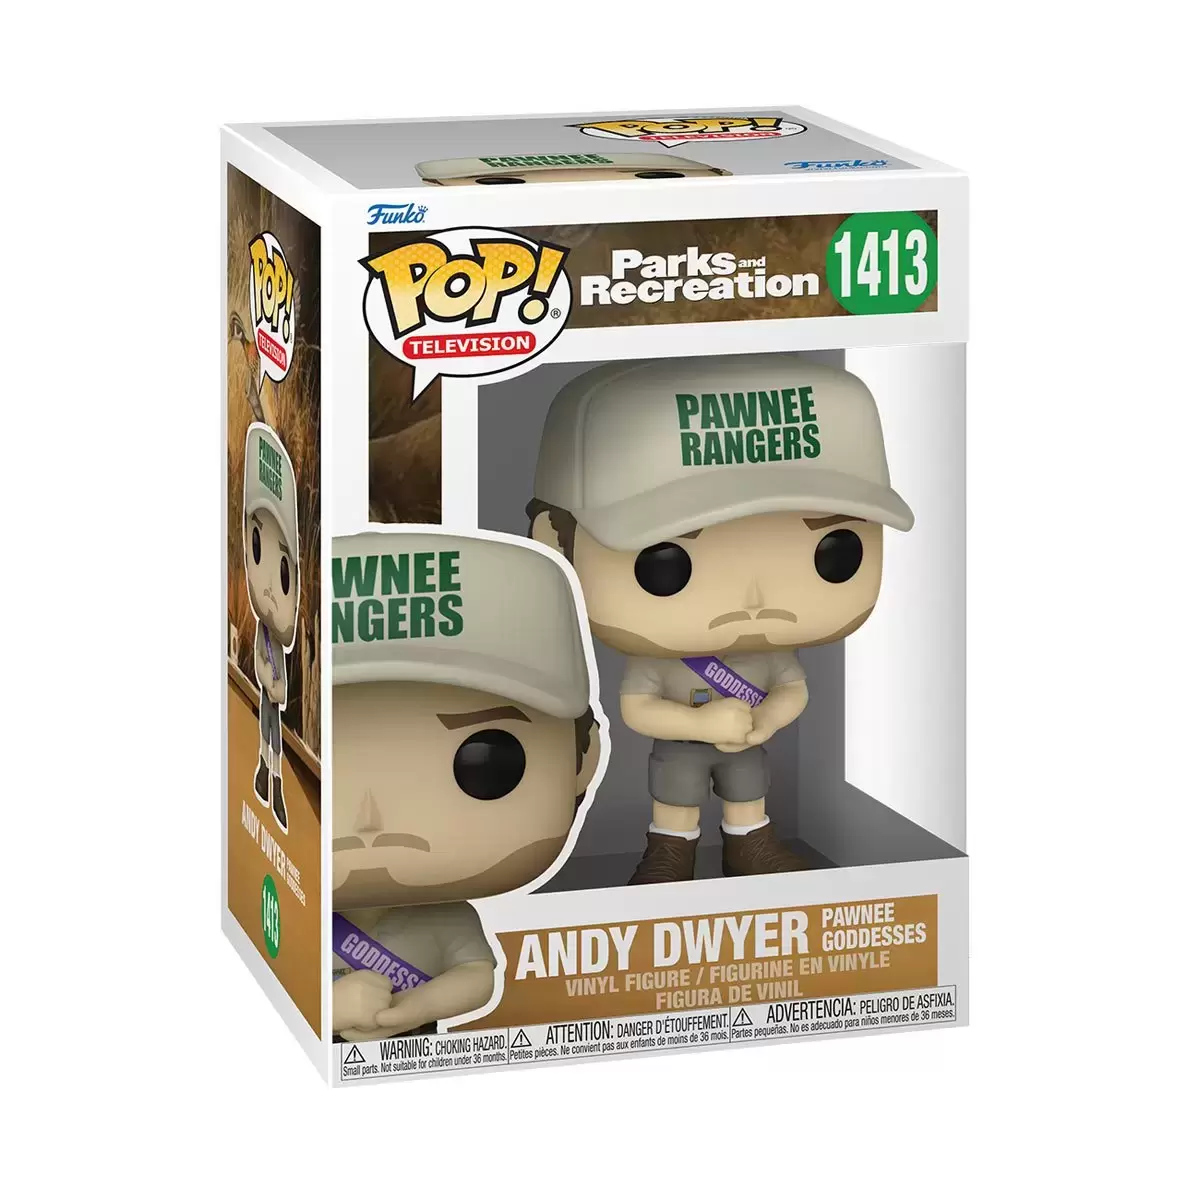 POP! Television - Parks And Recreation - Andy Dwyer Pawnee Goddesses